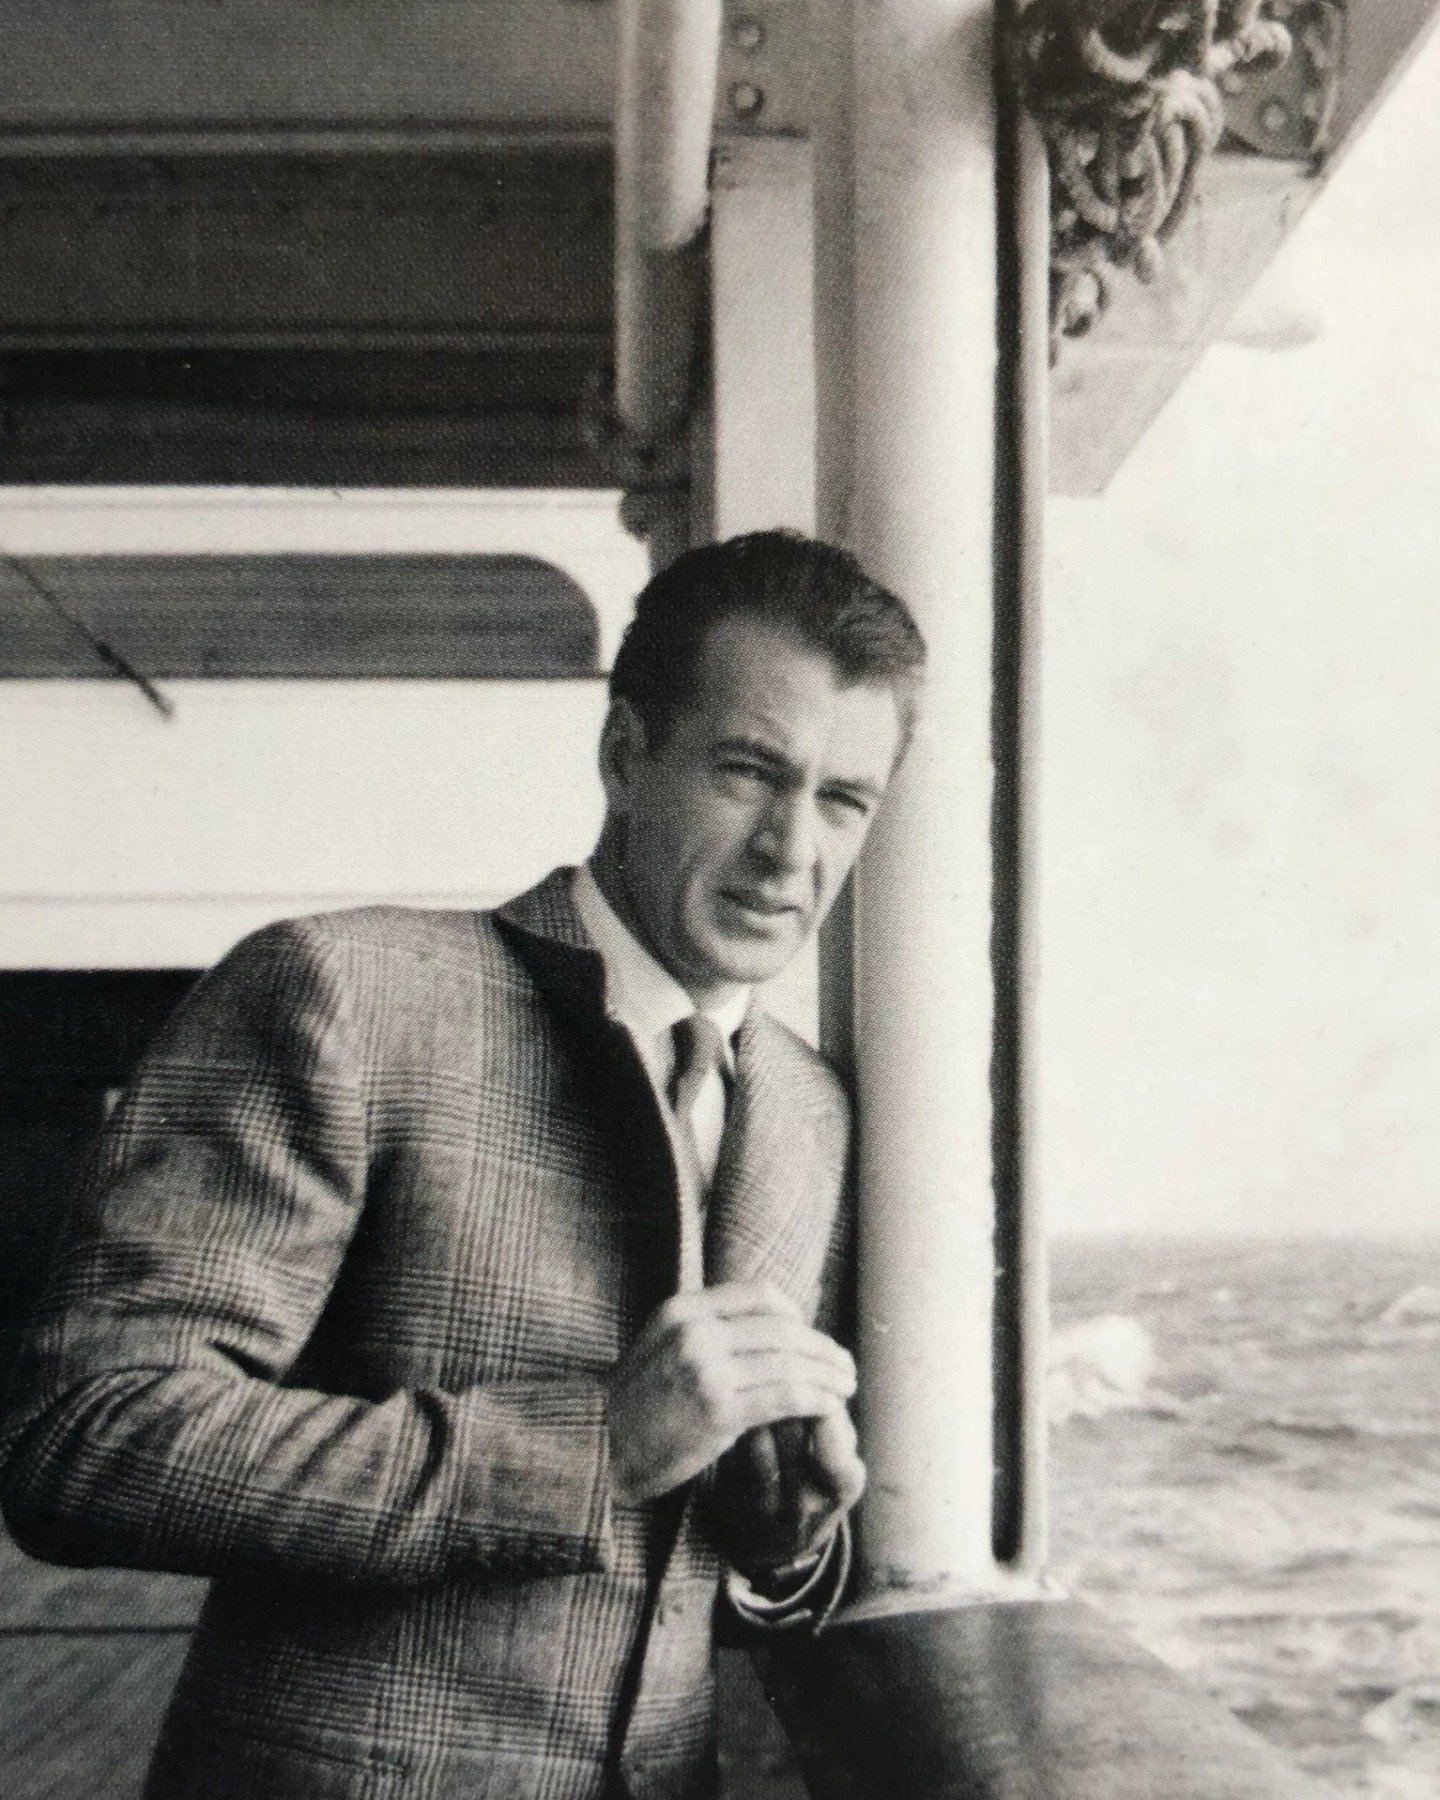 🎥🎩In today's spotlight, we're enchanted by the dashing allure of young Gary Cooper, captured aboard a ship in a moment of timeless sophistication.

Draped in a finely tailored suit, Cooper exudes an air of effortless elegance, his gaze as captivati